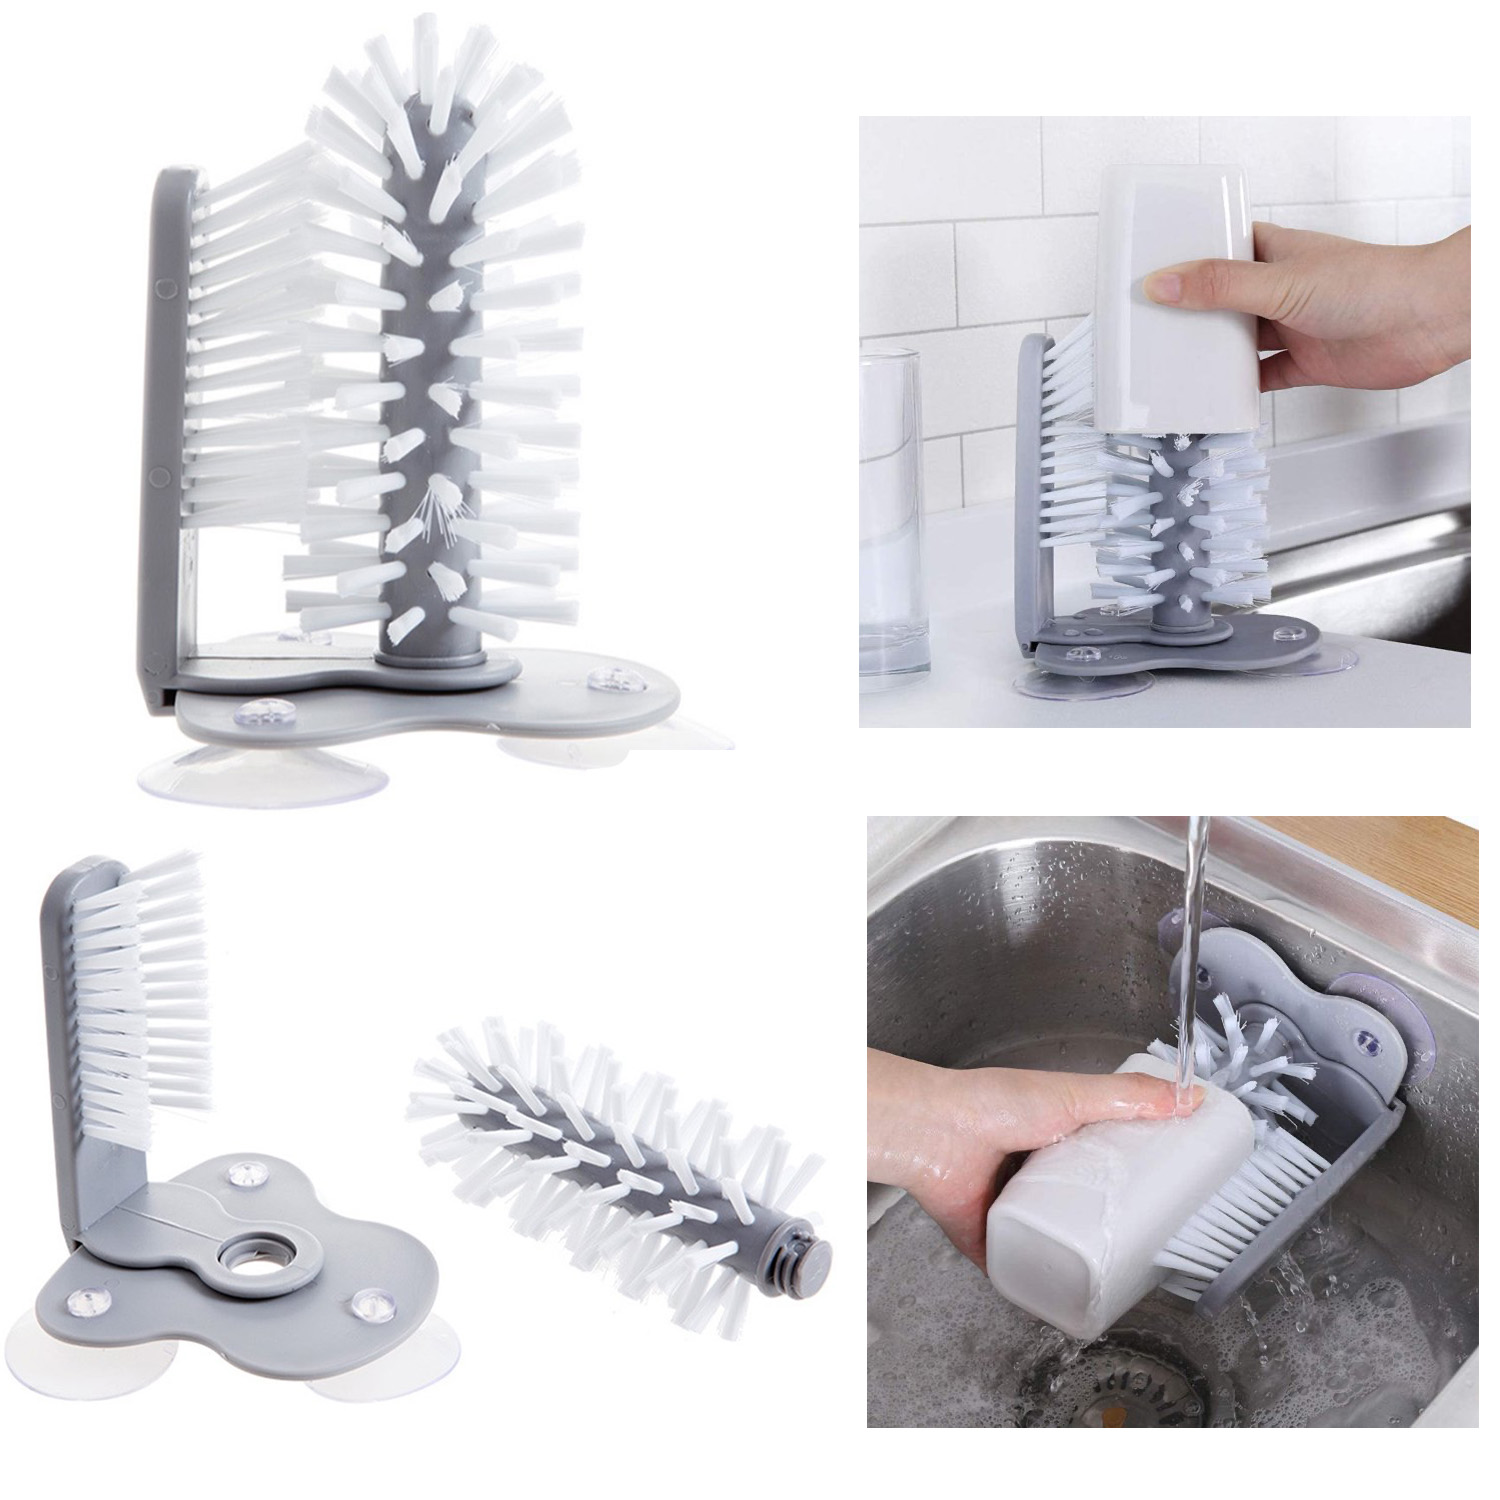 Sink Suction Wall Lazy Cup Brush Washer Wine Glass Cleaning Brush Suction Cup Cleaning Drip Boat Glass Cleaned Cleaning Cup Brush Bar Glass Cleaner Bruch